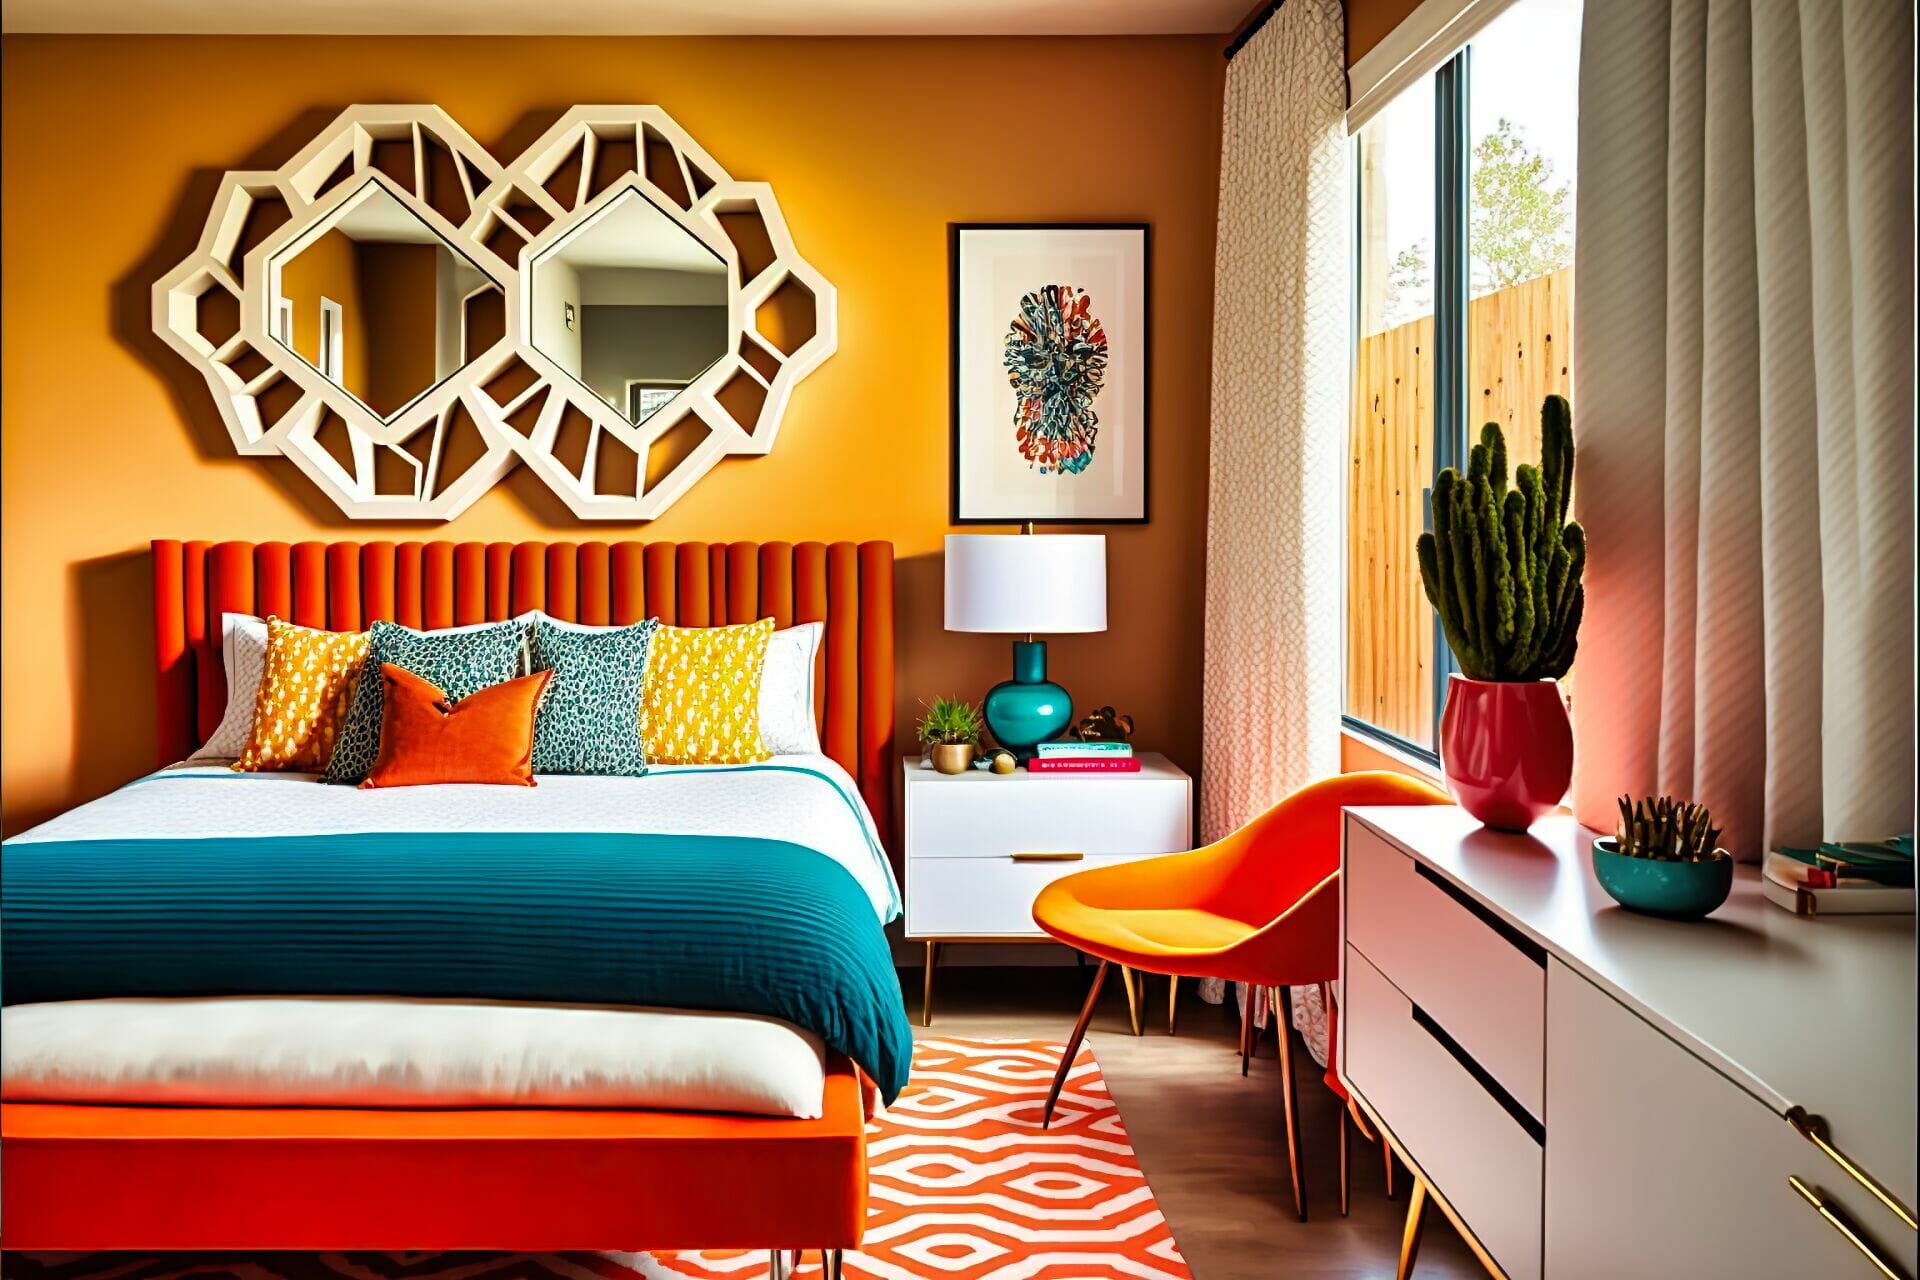 Mid-Century Modern Bedroom – A Vibrant Modern Bedroom Featuring A Bright Orange Bed Frame, A Geometric Patterned Area Rug, And A Framed Wallpaper Art Piece Hung Above The Bed.